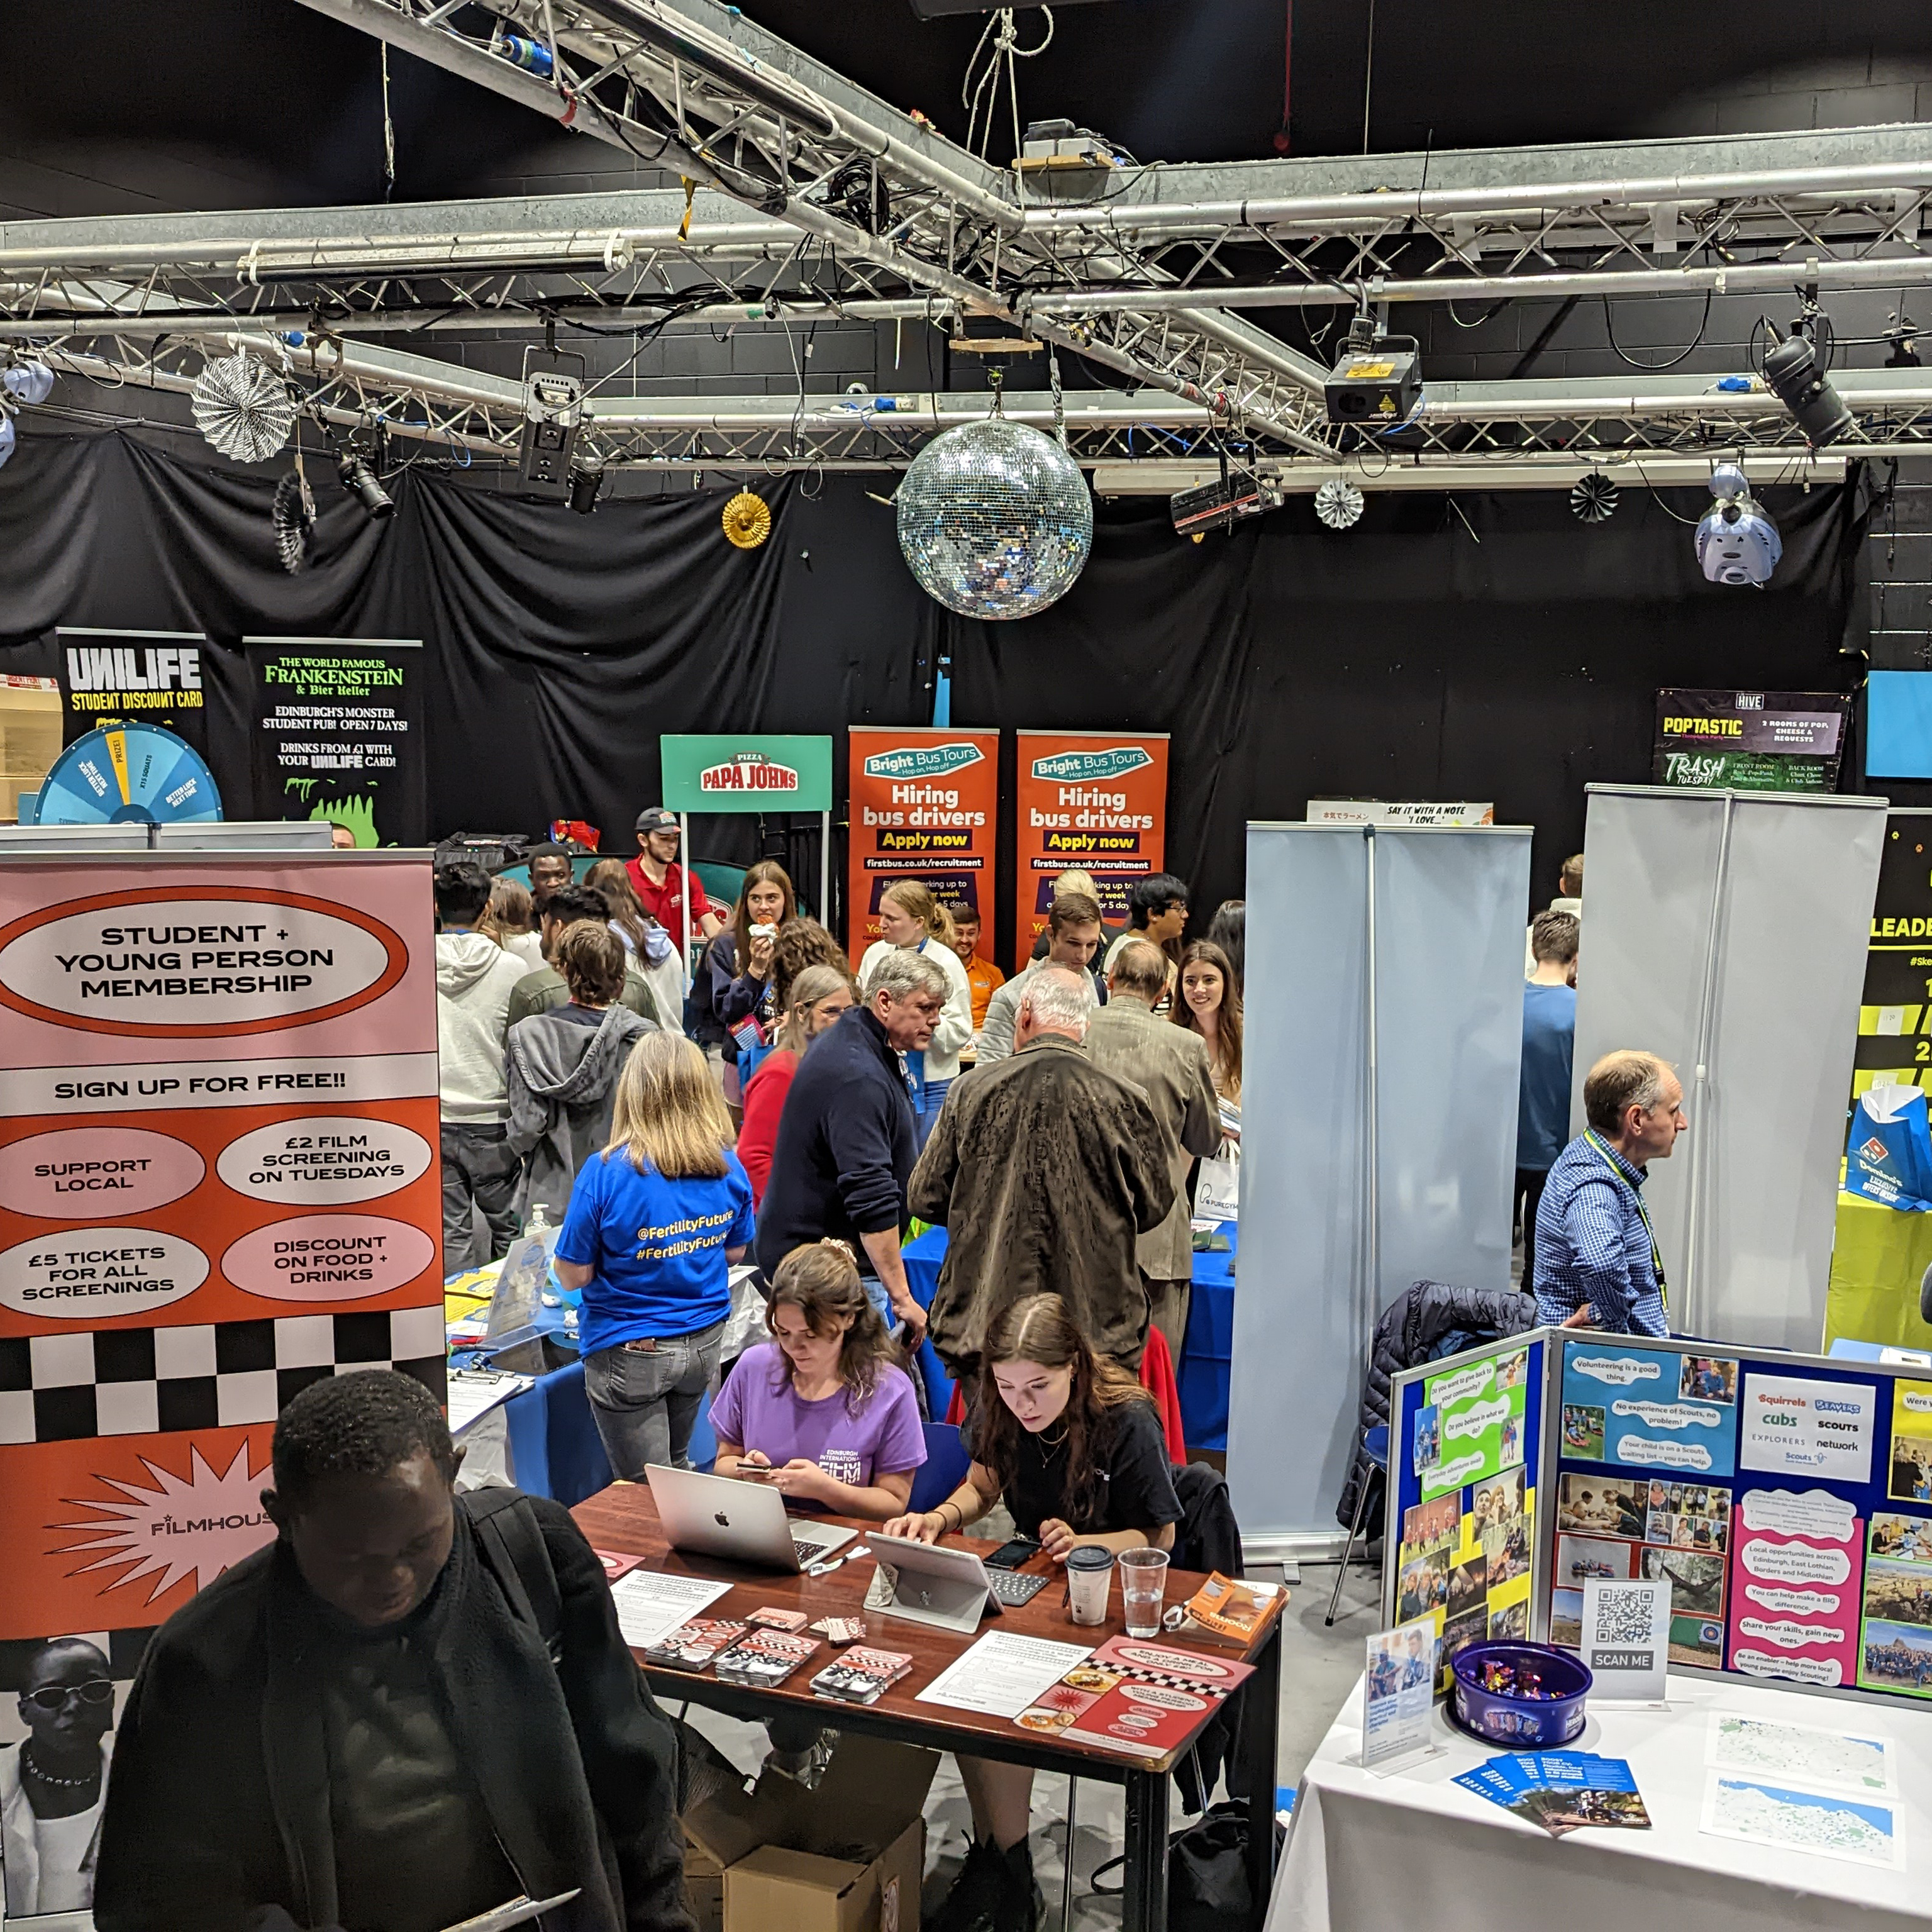 Interior shot of a commercial fair filled with students